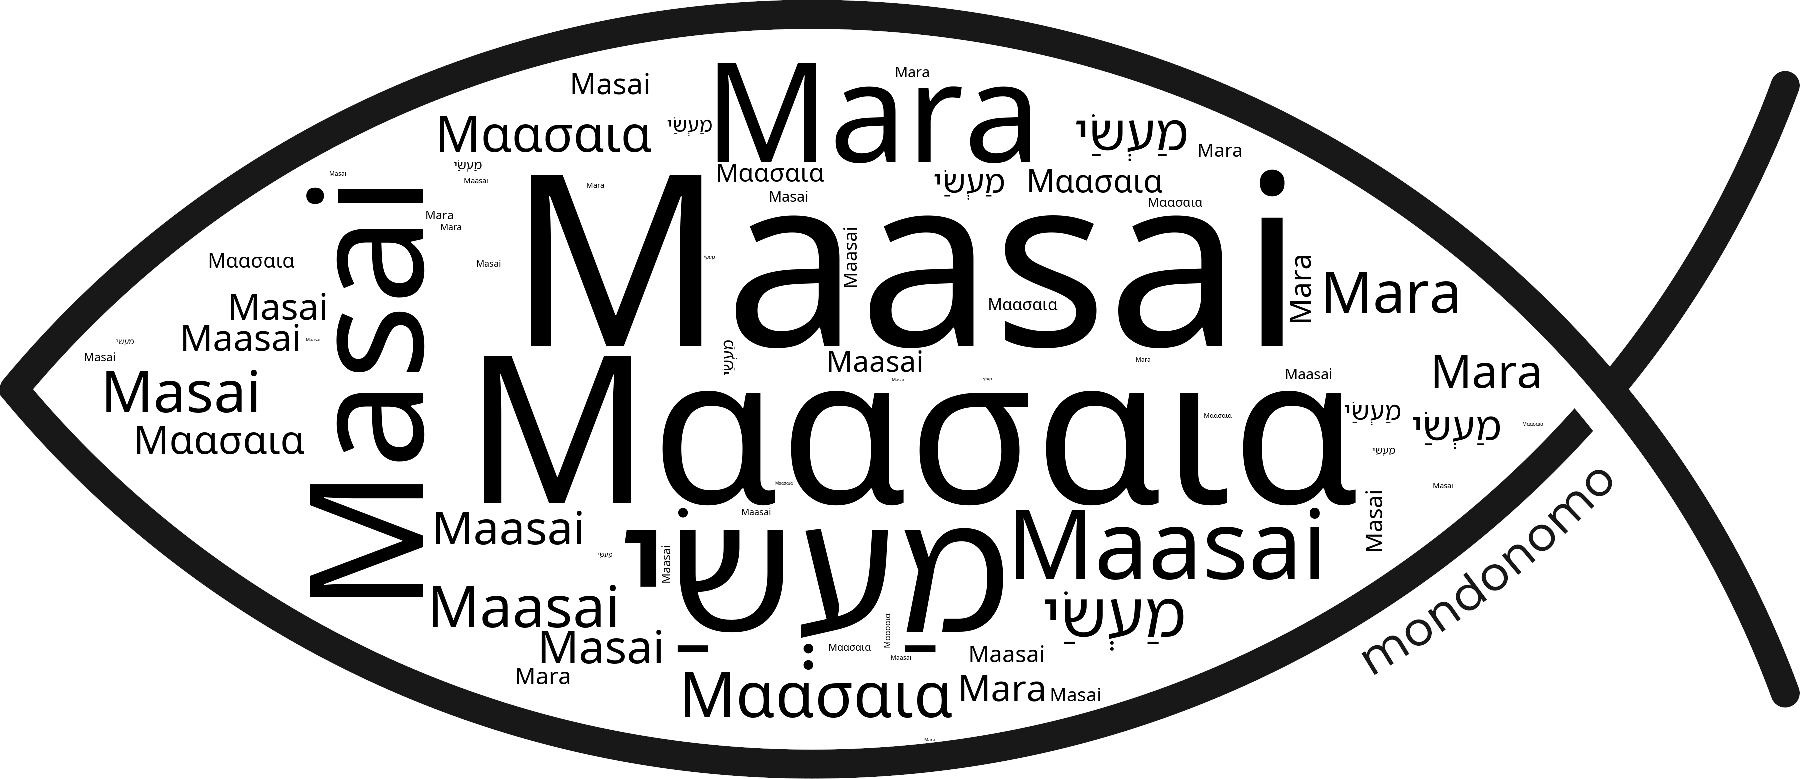 Name Maasai in the world's Bibles